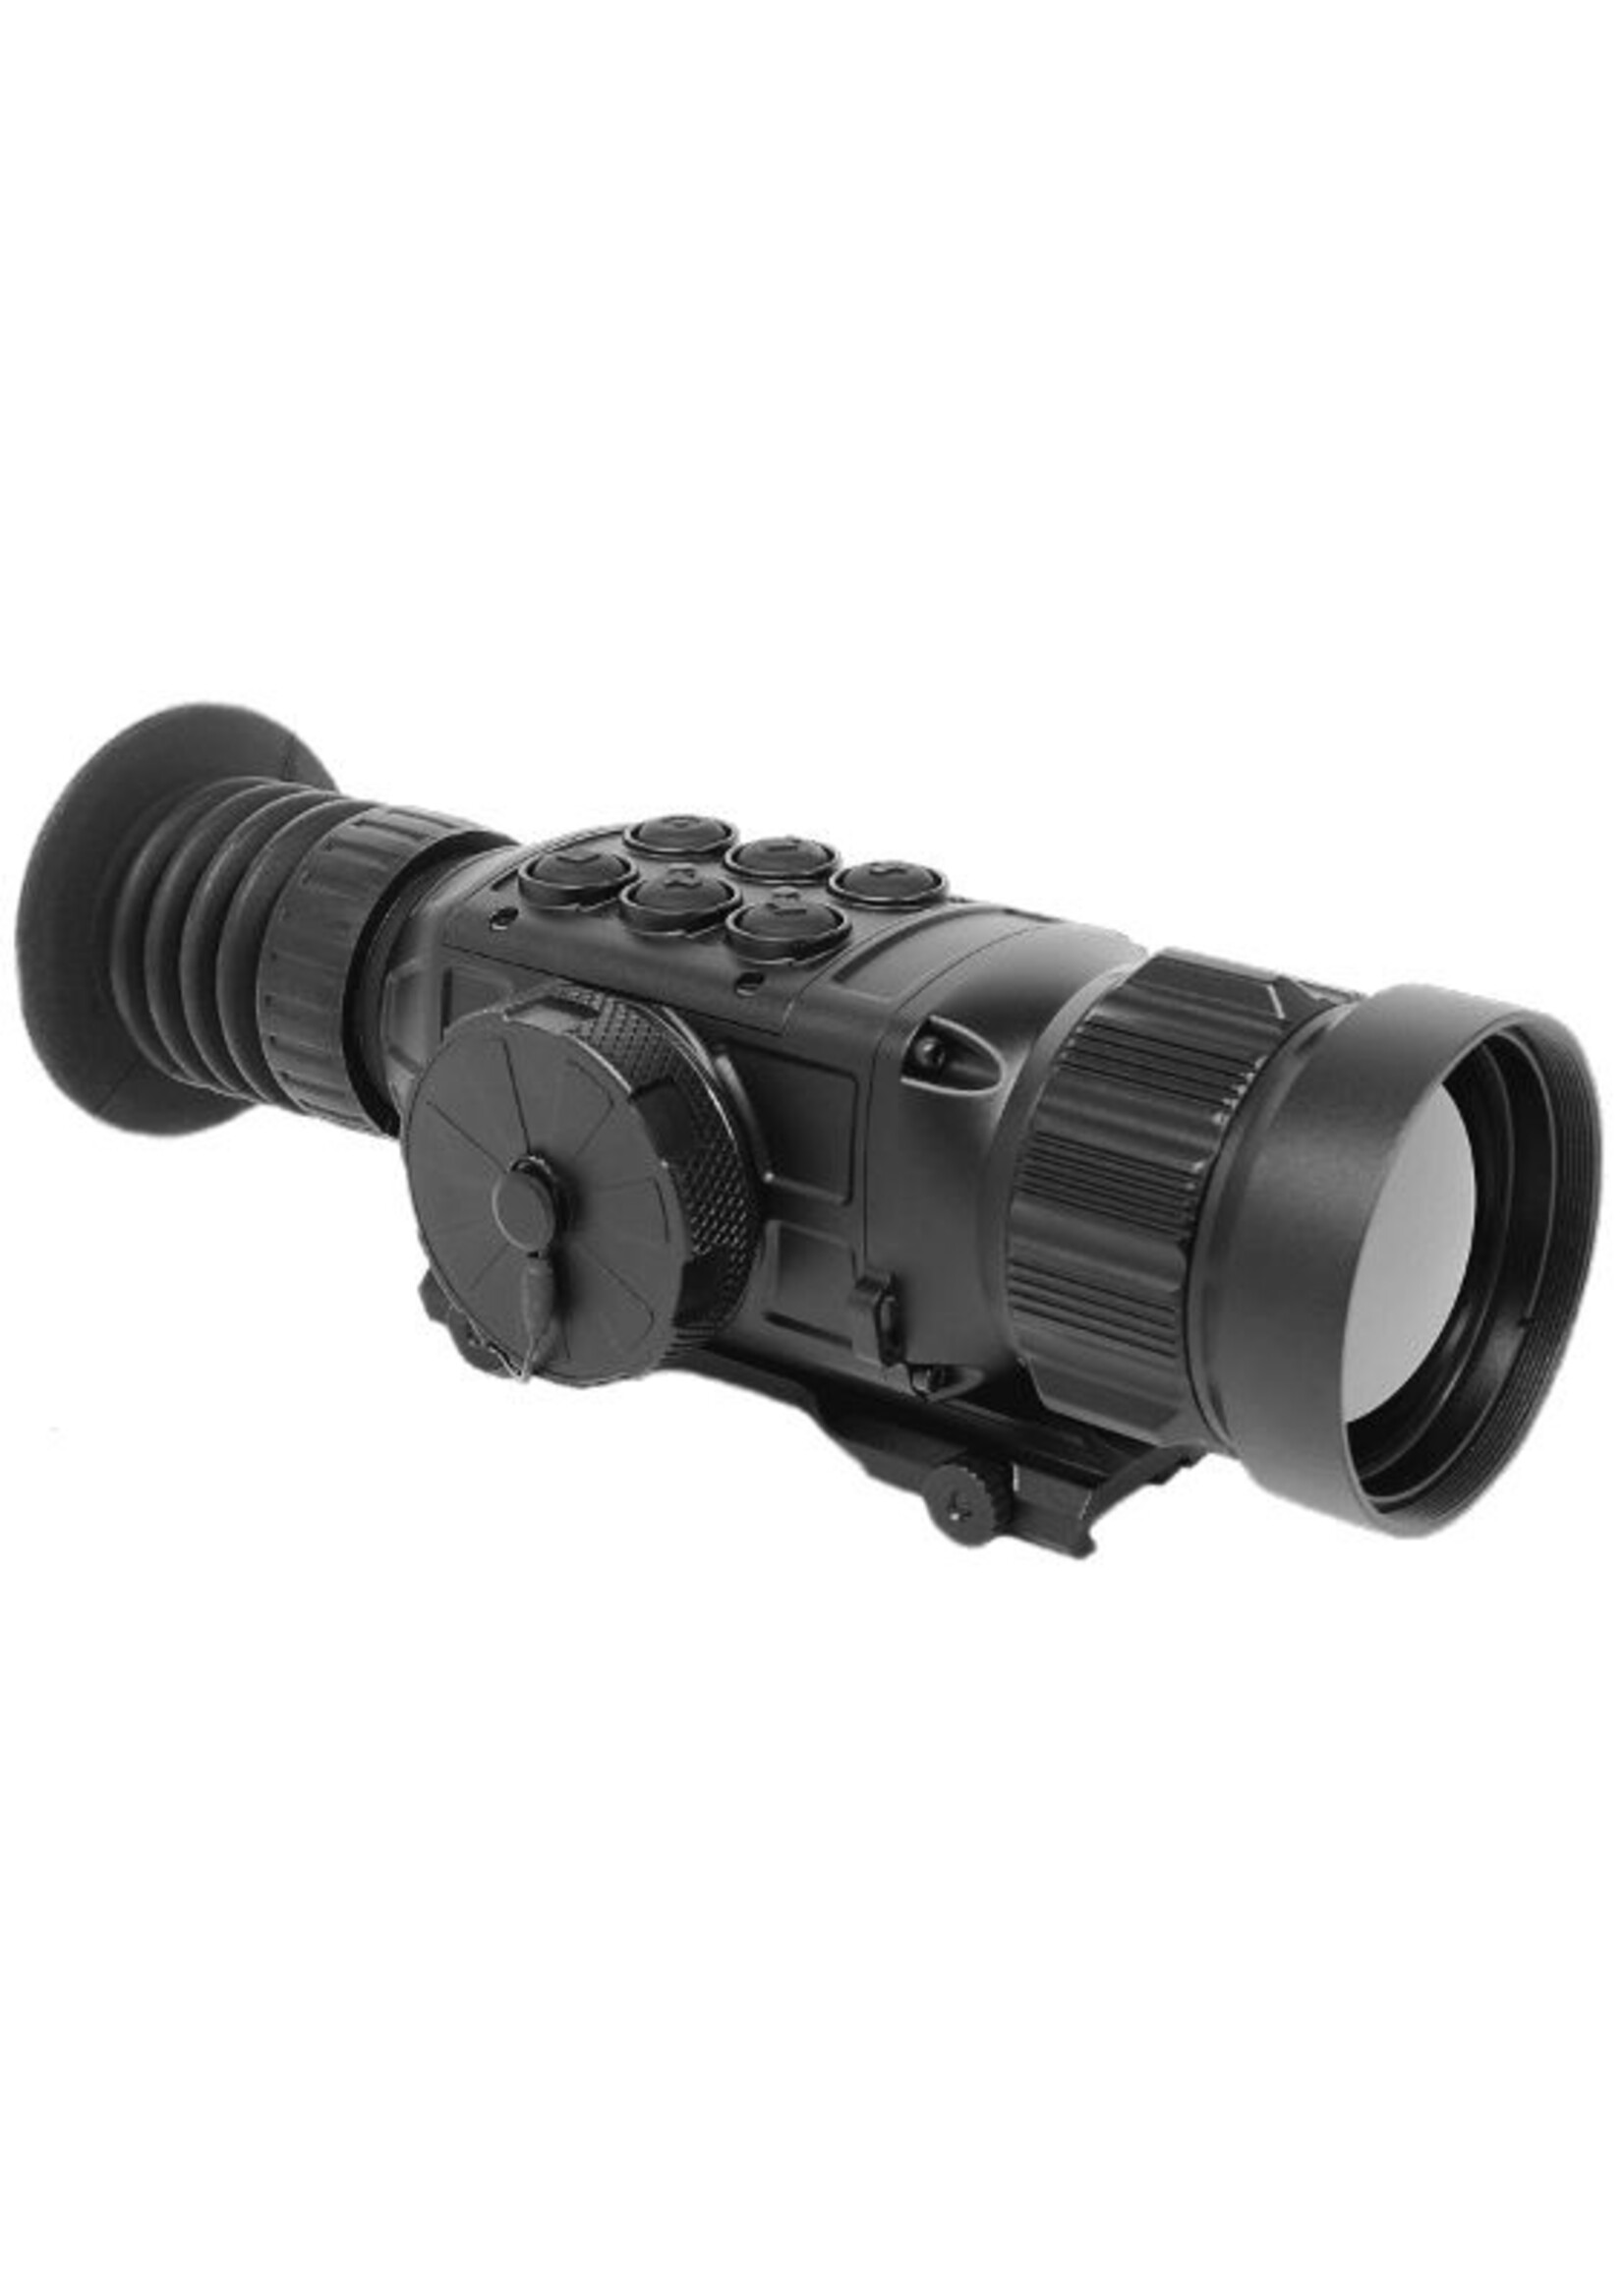 GSCI TWS SUPREME GRADE THERMAL WEAPON SCCOPE